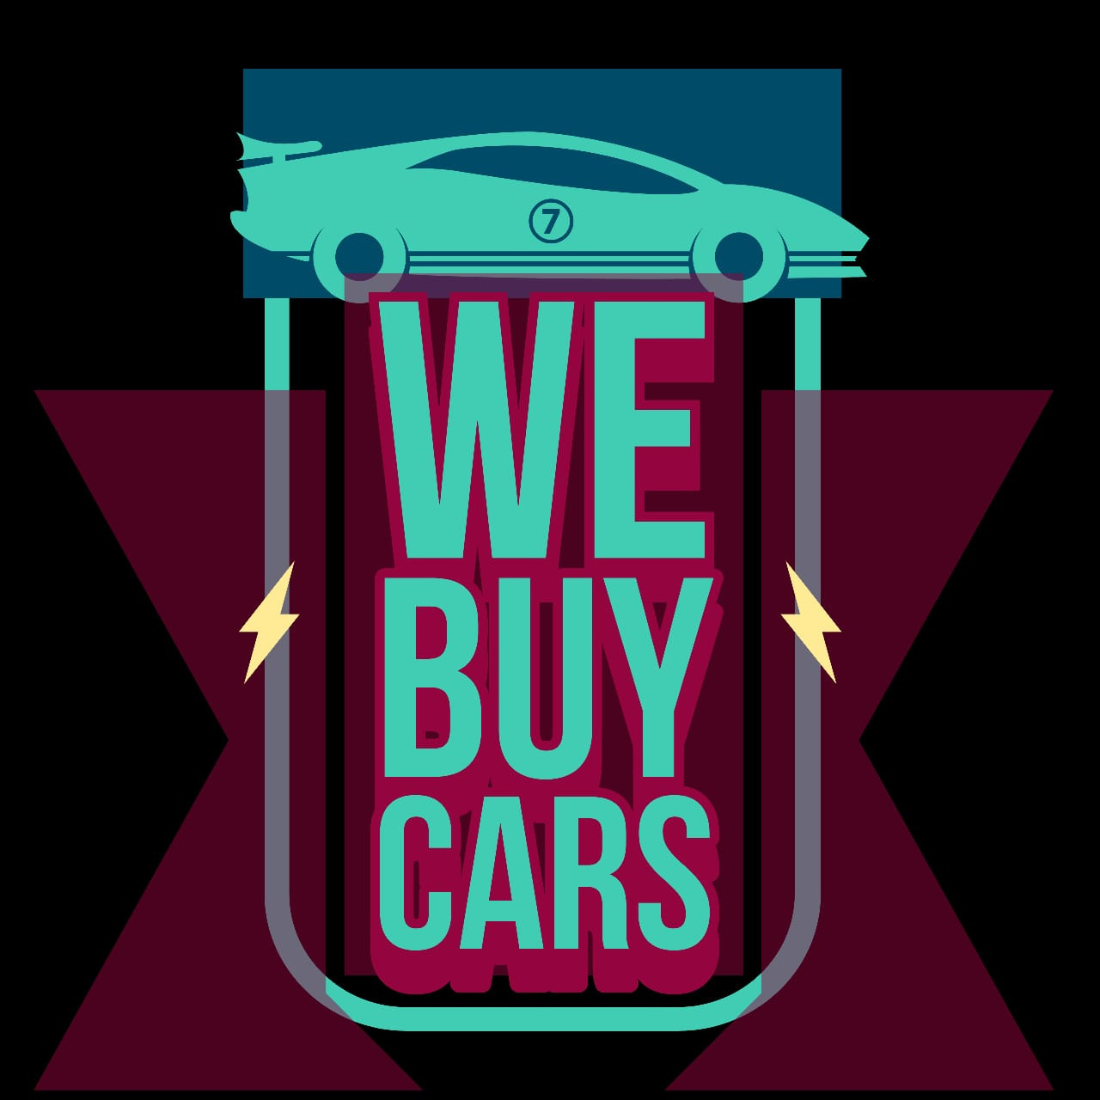 We Buy Cars Business Logos in purple-blue color.